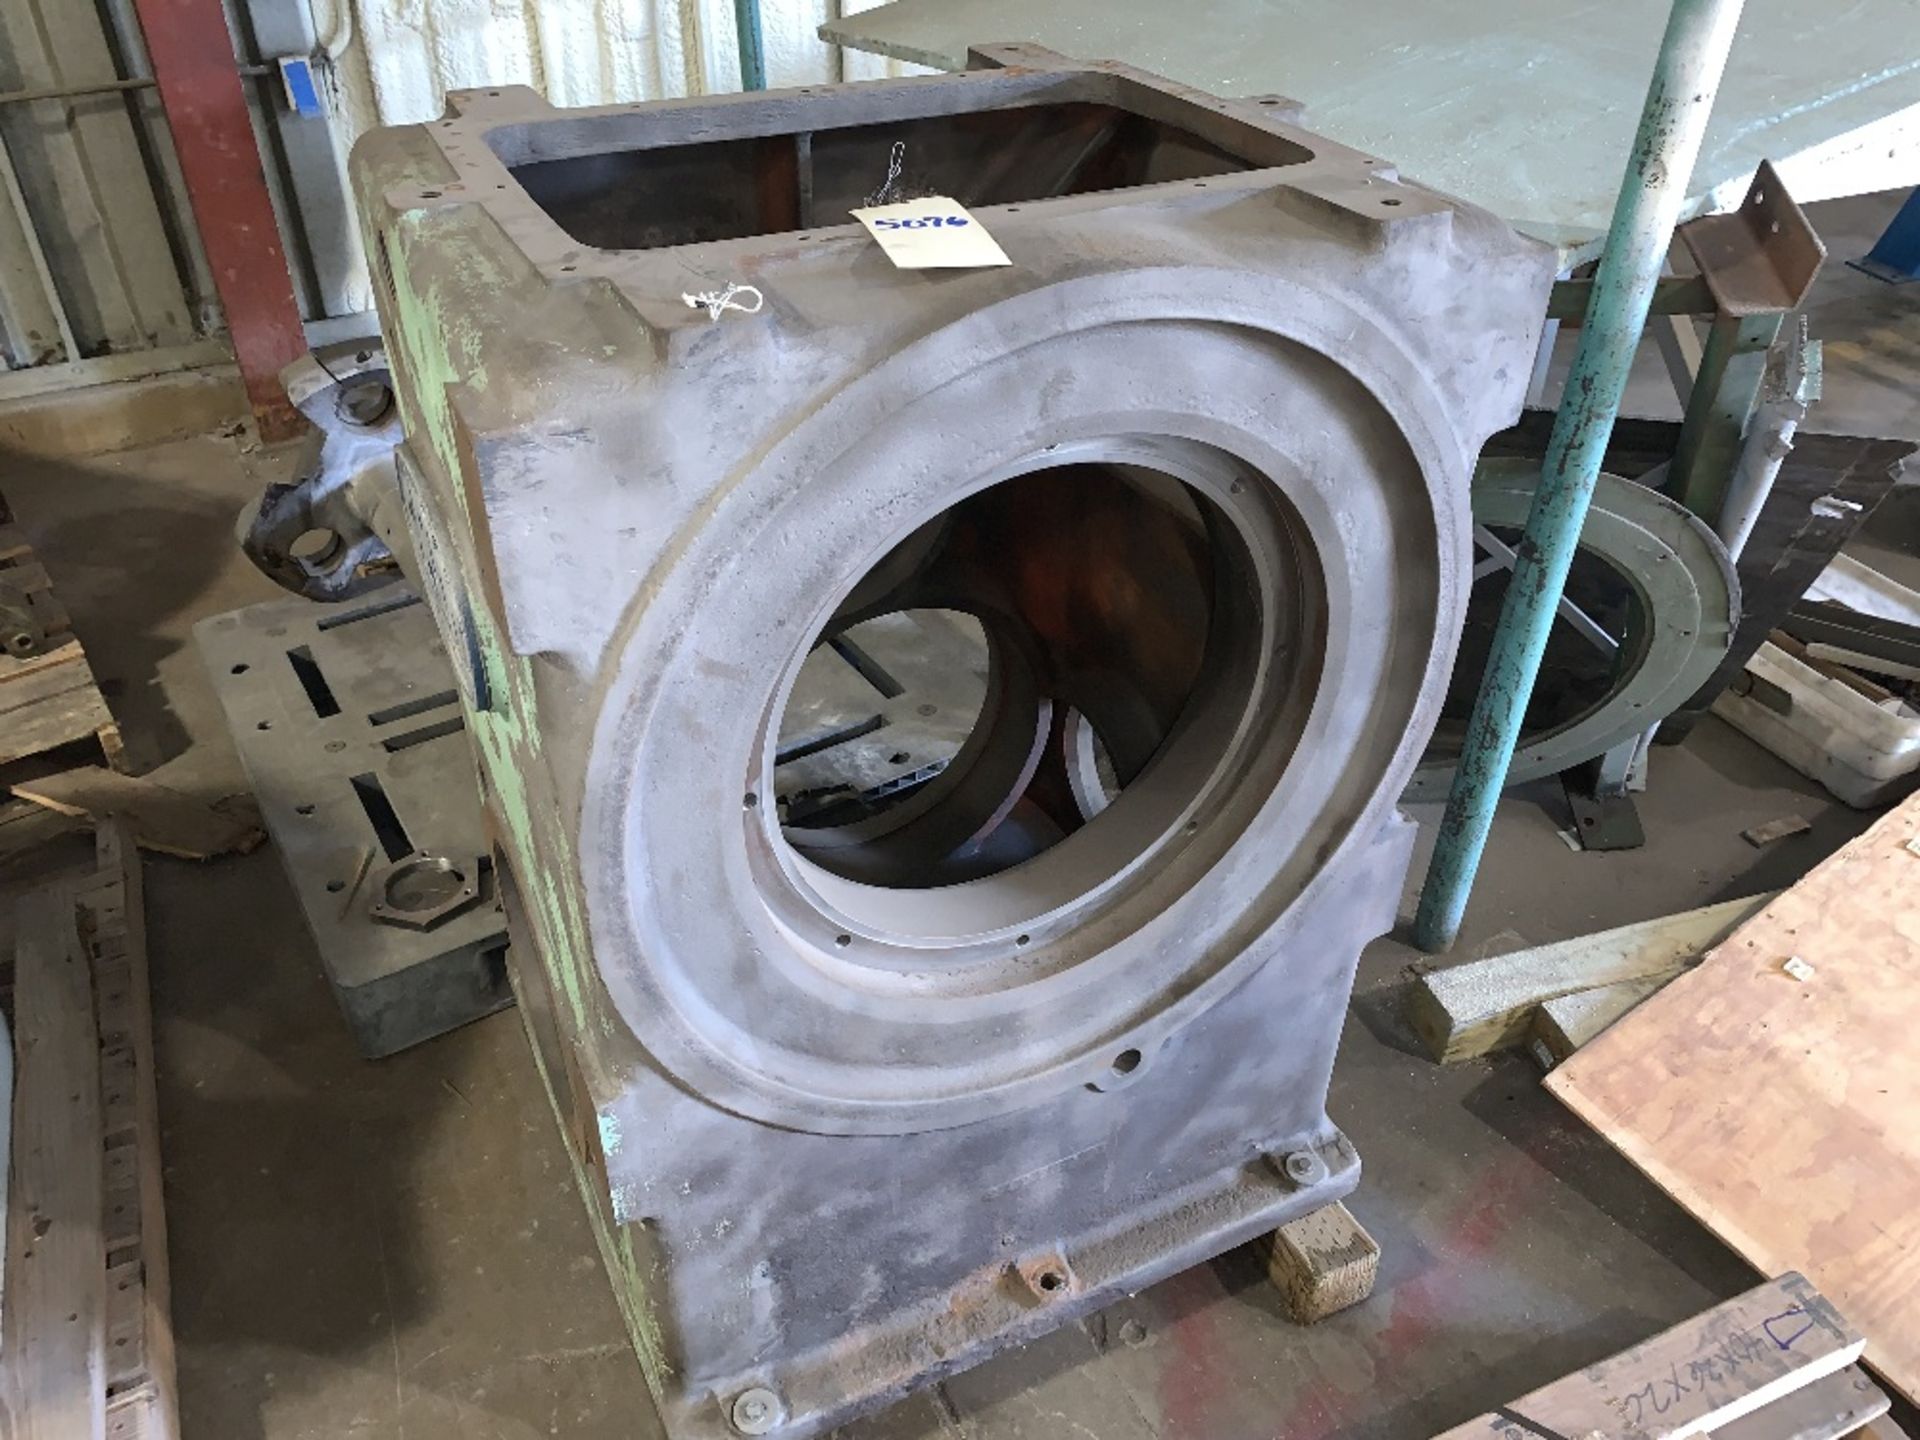 Canon City CO CPM DS Pellet mill casting sandblasted and prepped for rebuild, new replacement cost